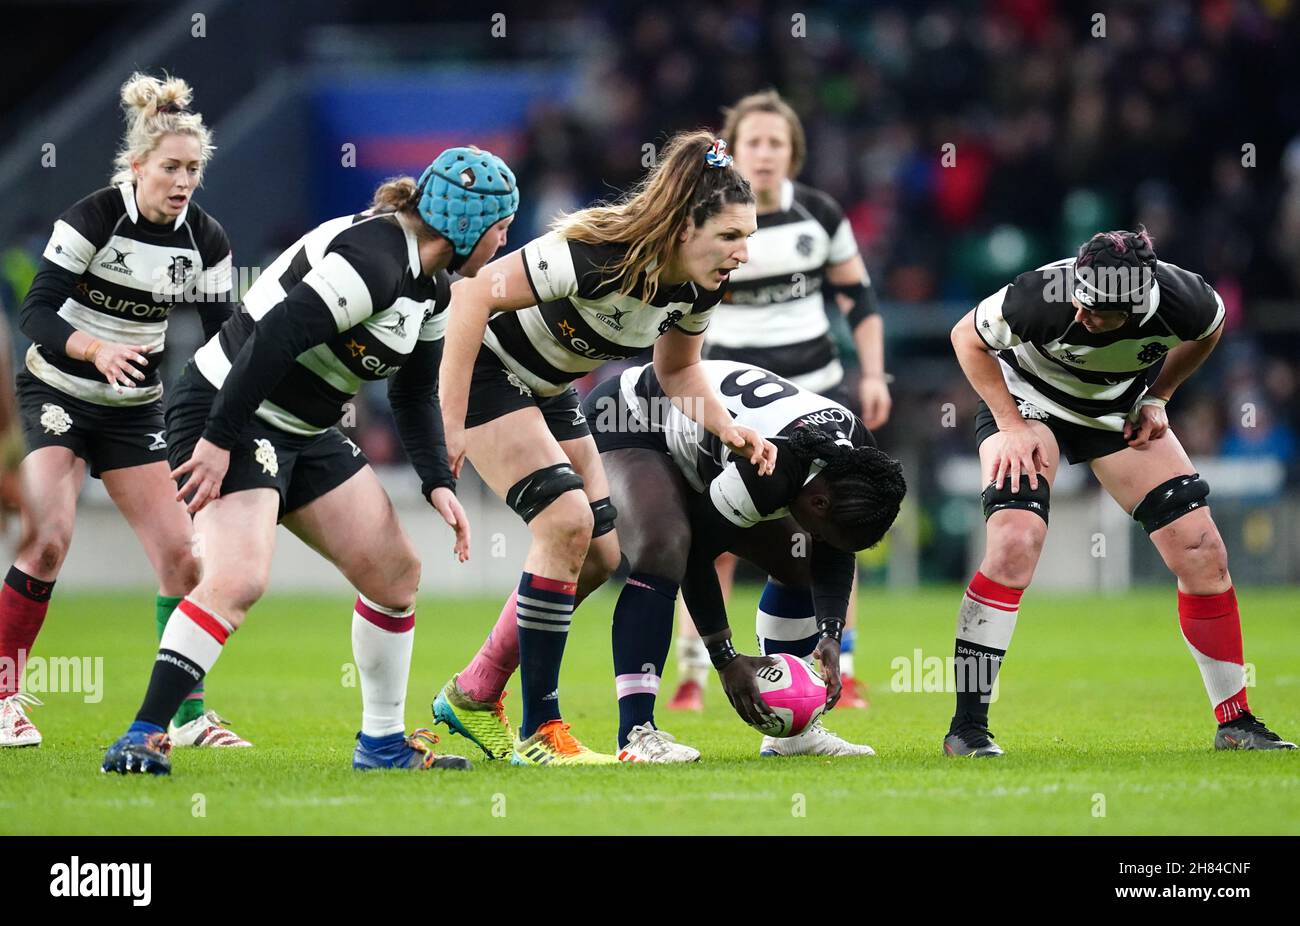 Barbarians Women take a penalty as a line of scrummage during the Autumn International match at Twickenham Stadium, London. Picture date: Saturday November 27, 2021. See PA story RUGBYU Barbarian Women. Photo credit should read: David Davies/PA Wire. RESTRICTIONS: Use subject to restrictions. Editorial use only, no commercial use without prior consent from rights holder. Stock Photo